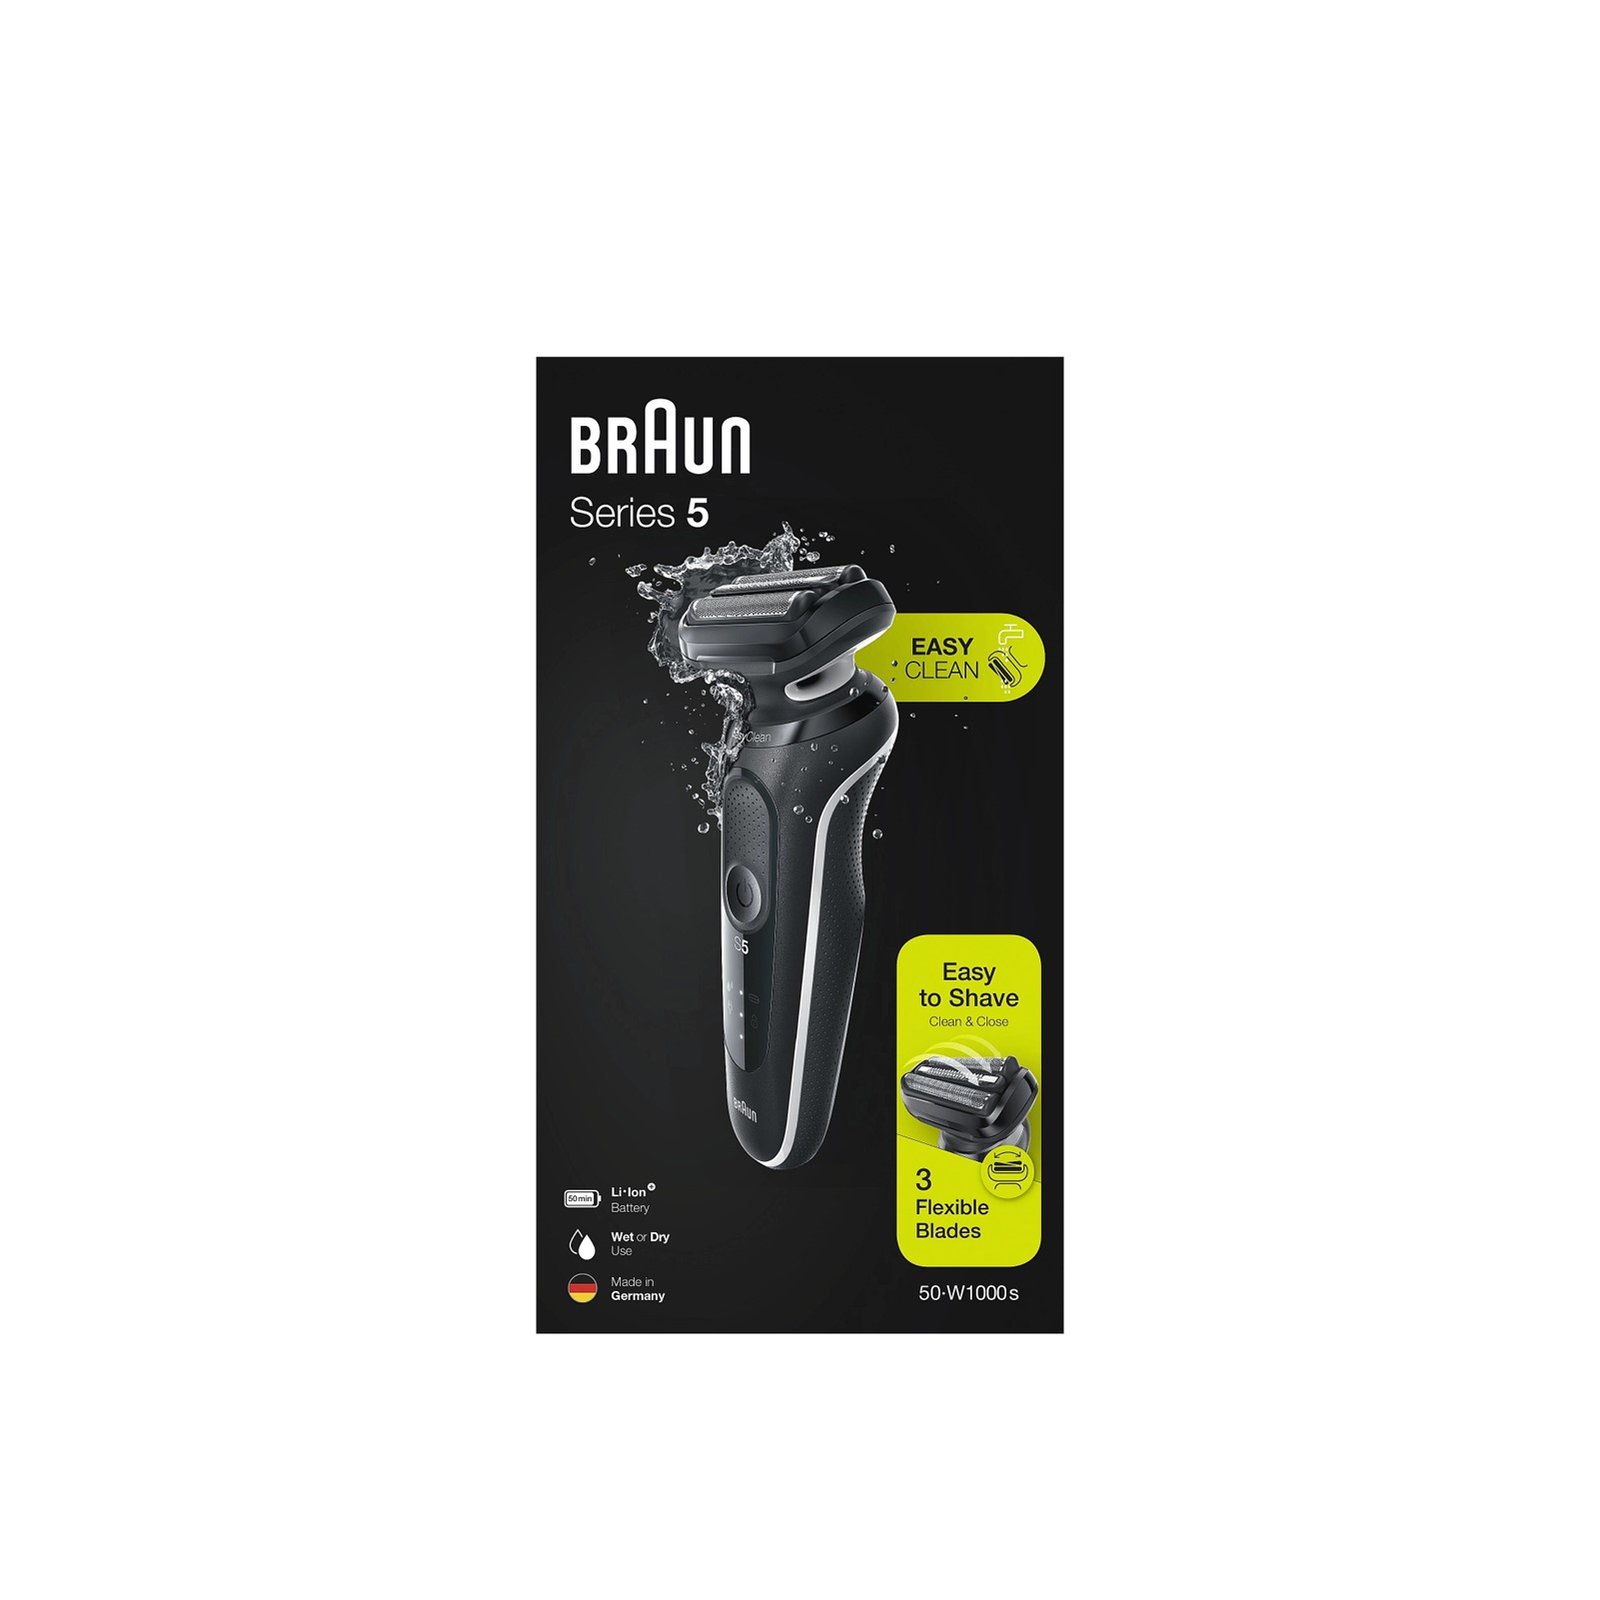 Buy Braun Series 5 EasyClean Electric · USA Shaver 51 W1000 S